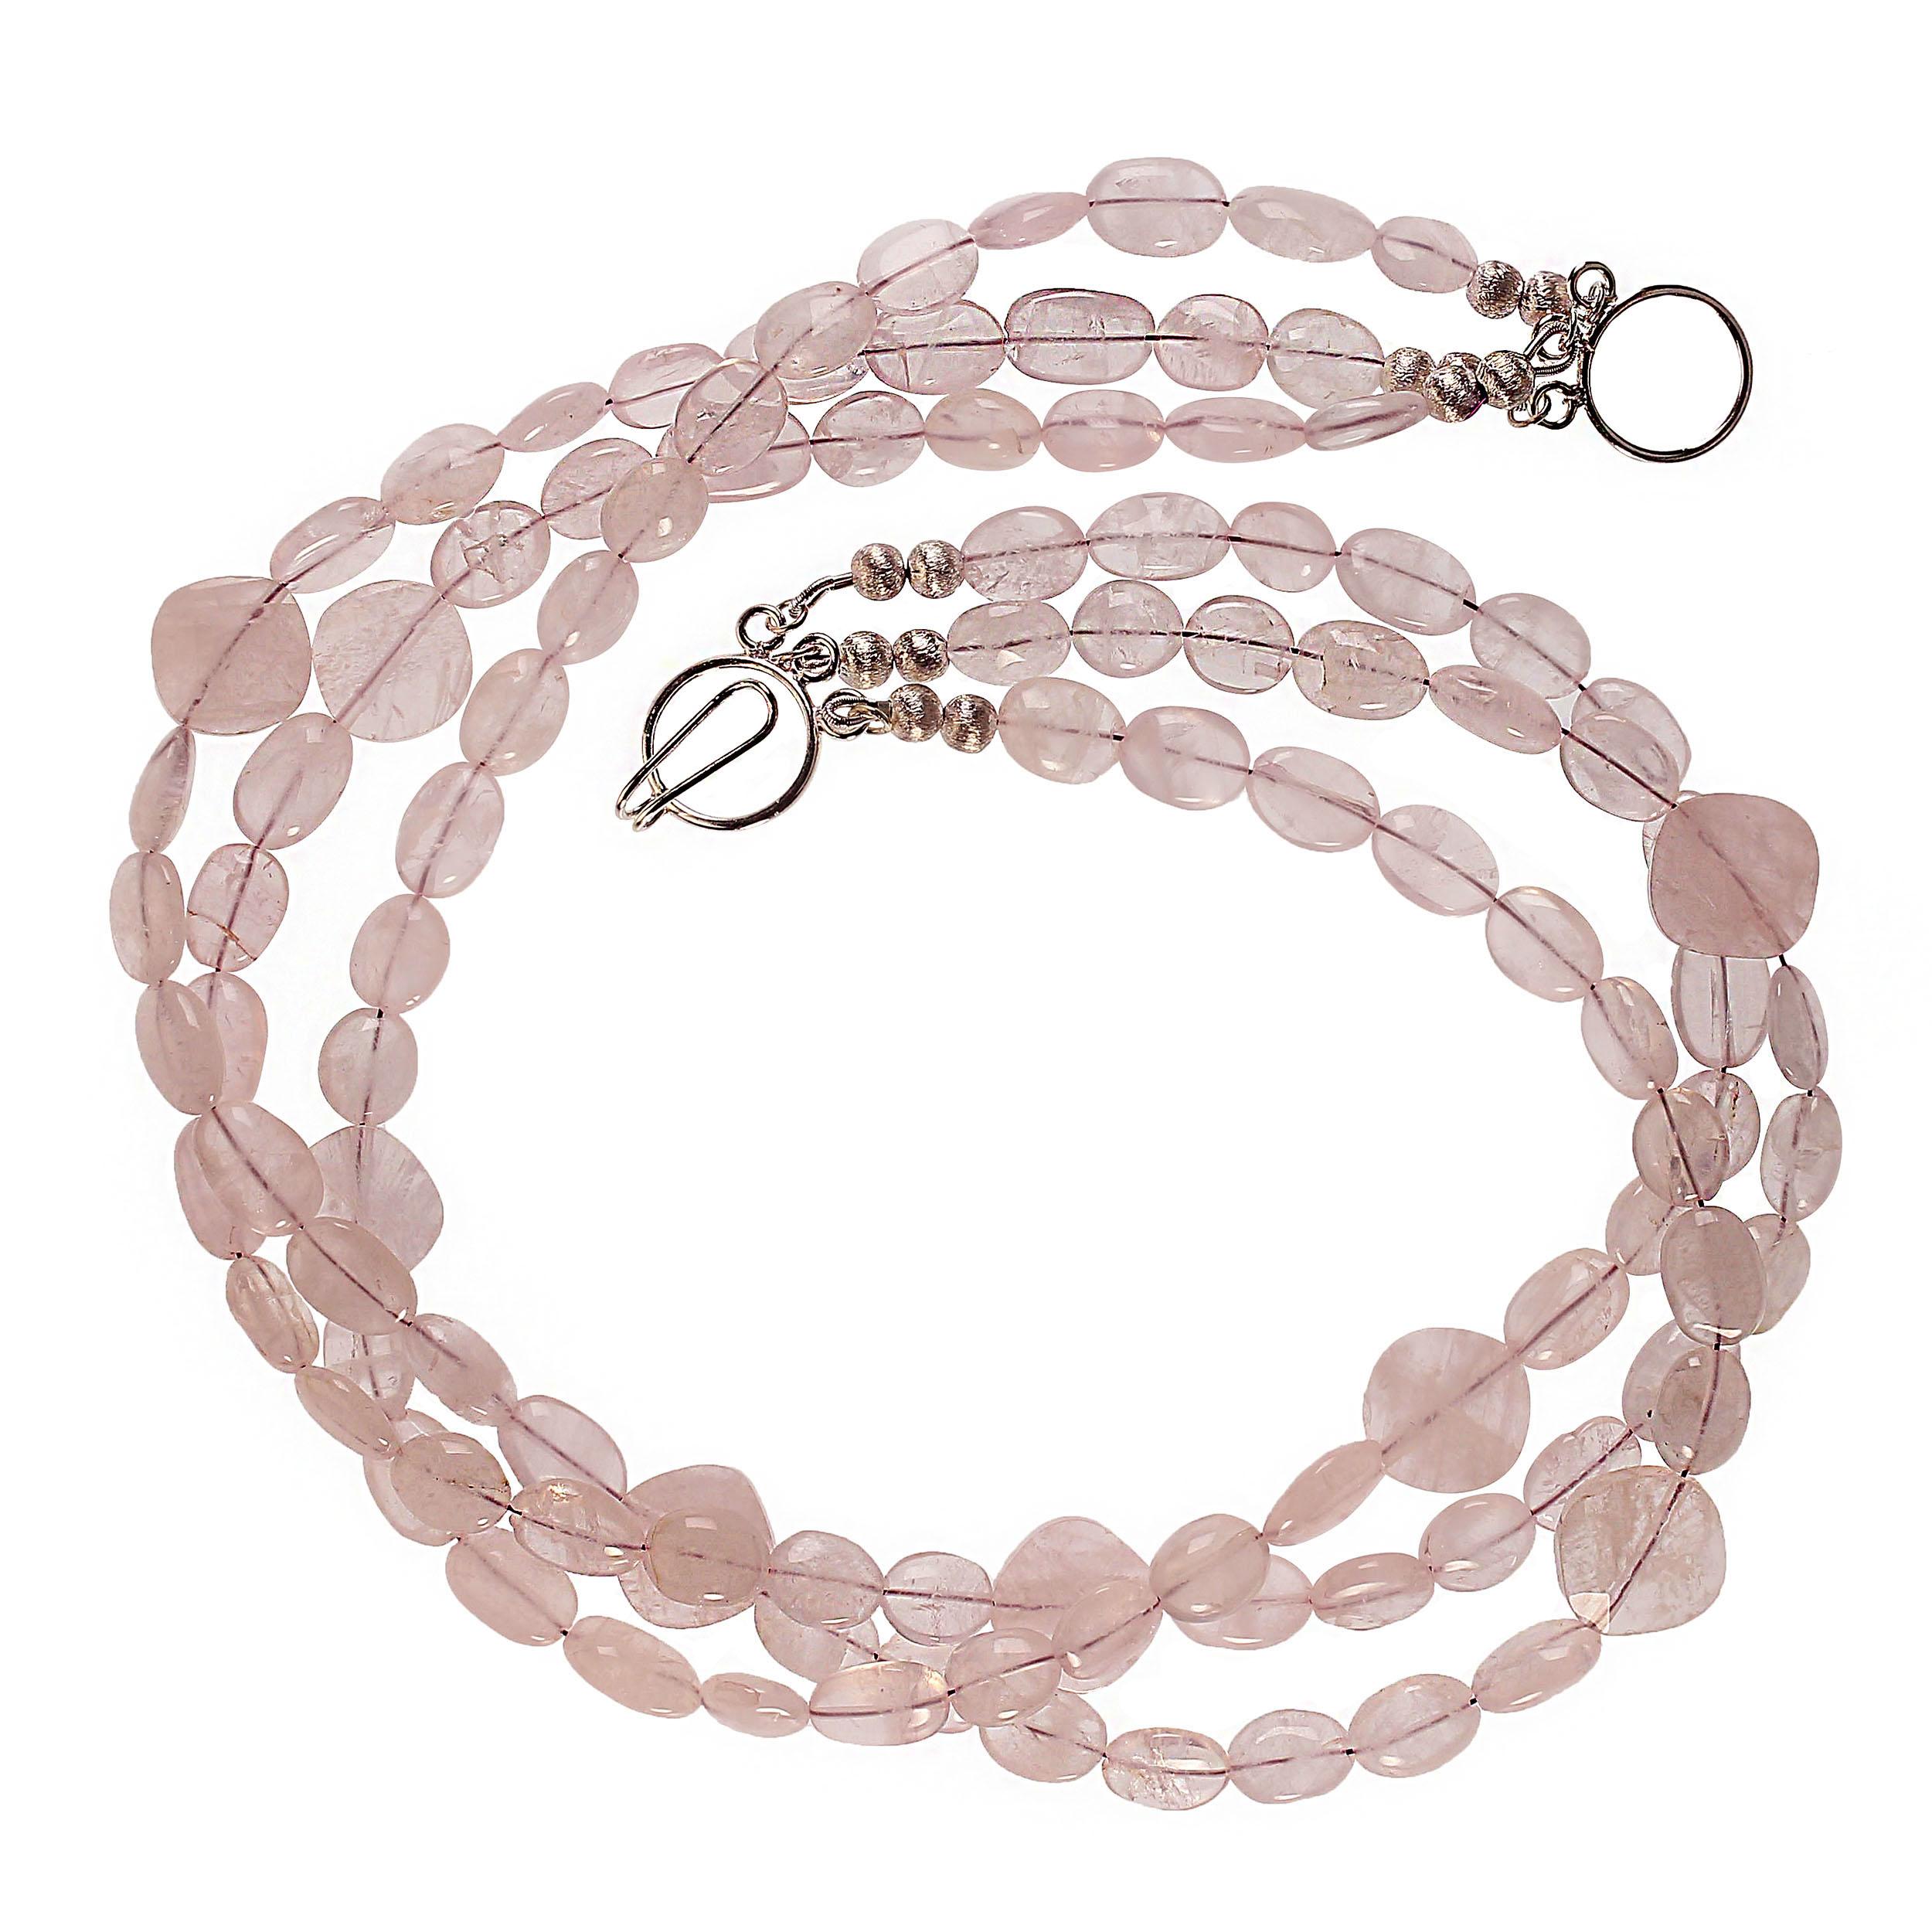 AJD 19 Inch Three strand  Glowing Rose Quartz necklace In New Condition For Sale In Raleigh, NC